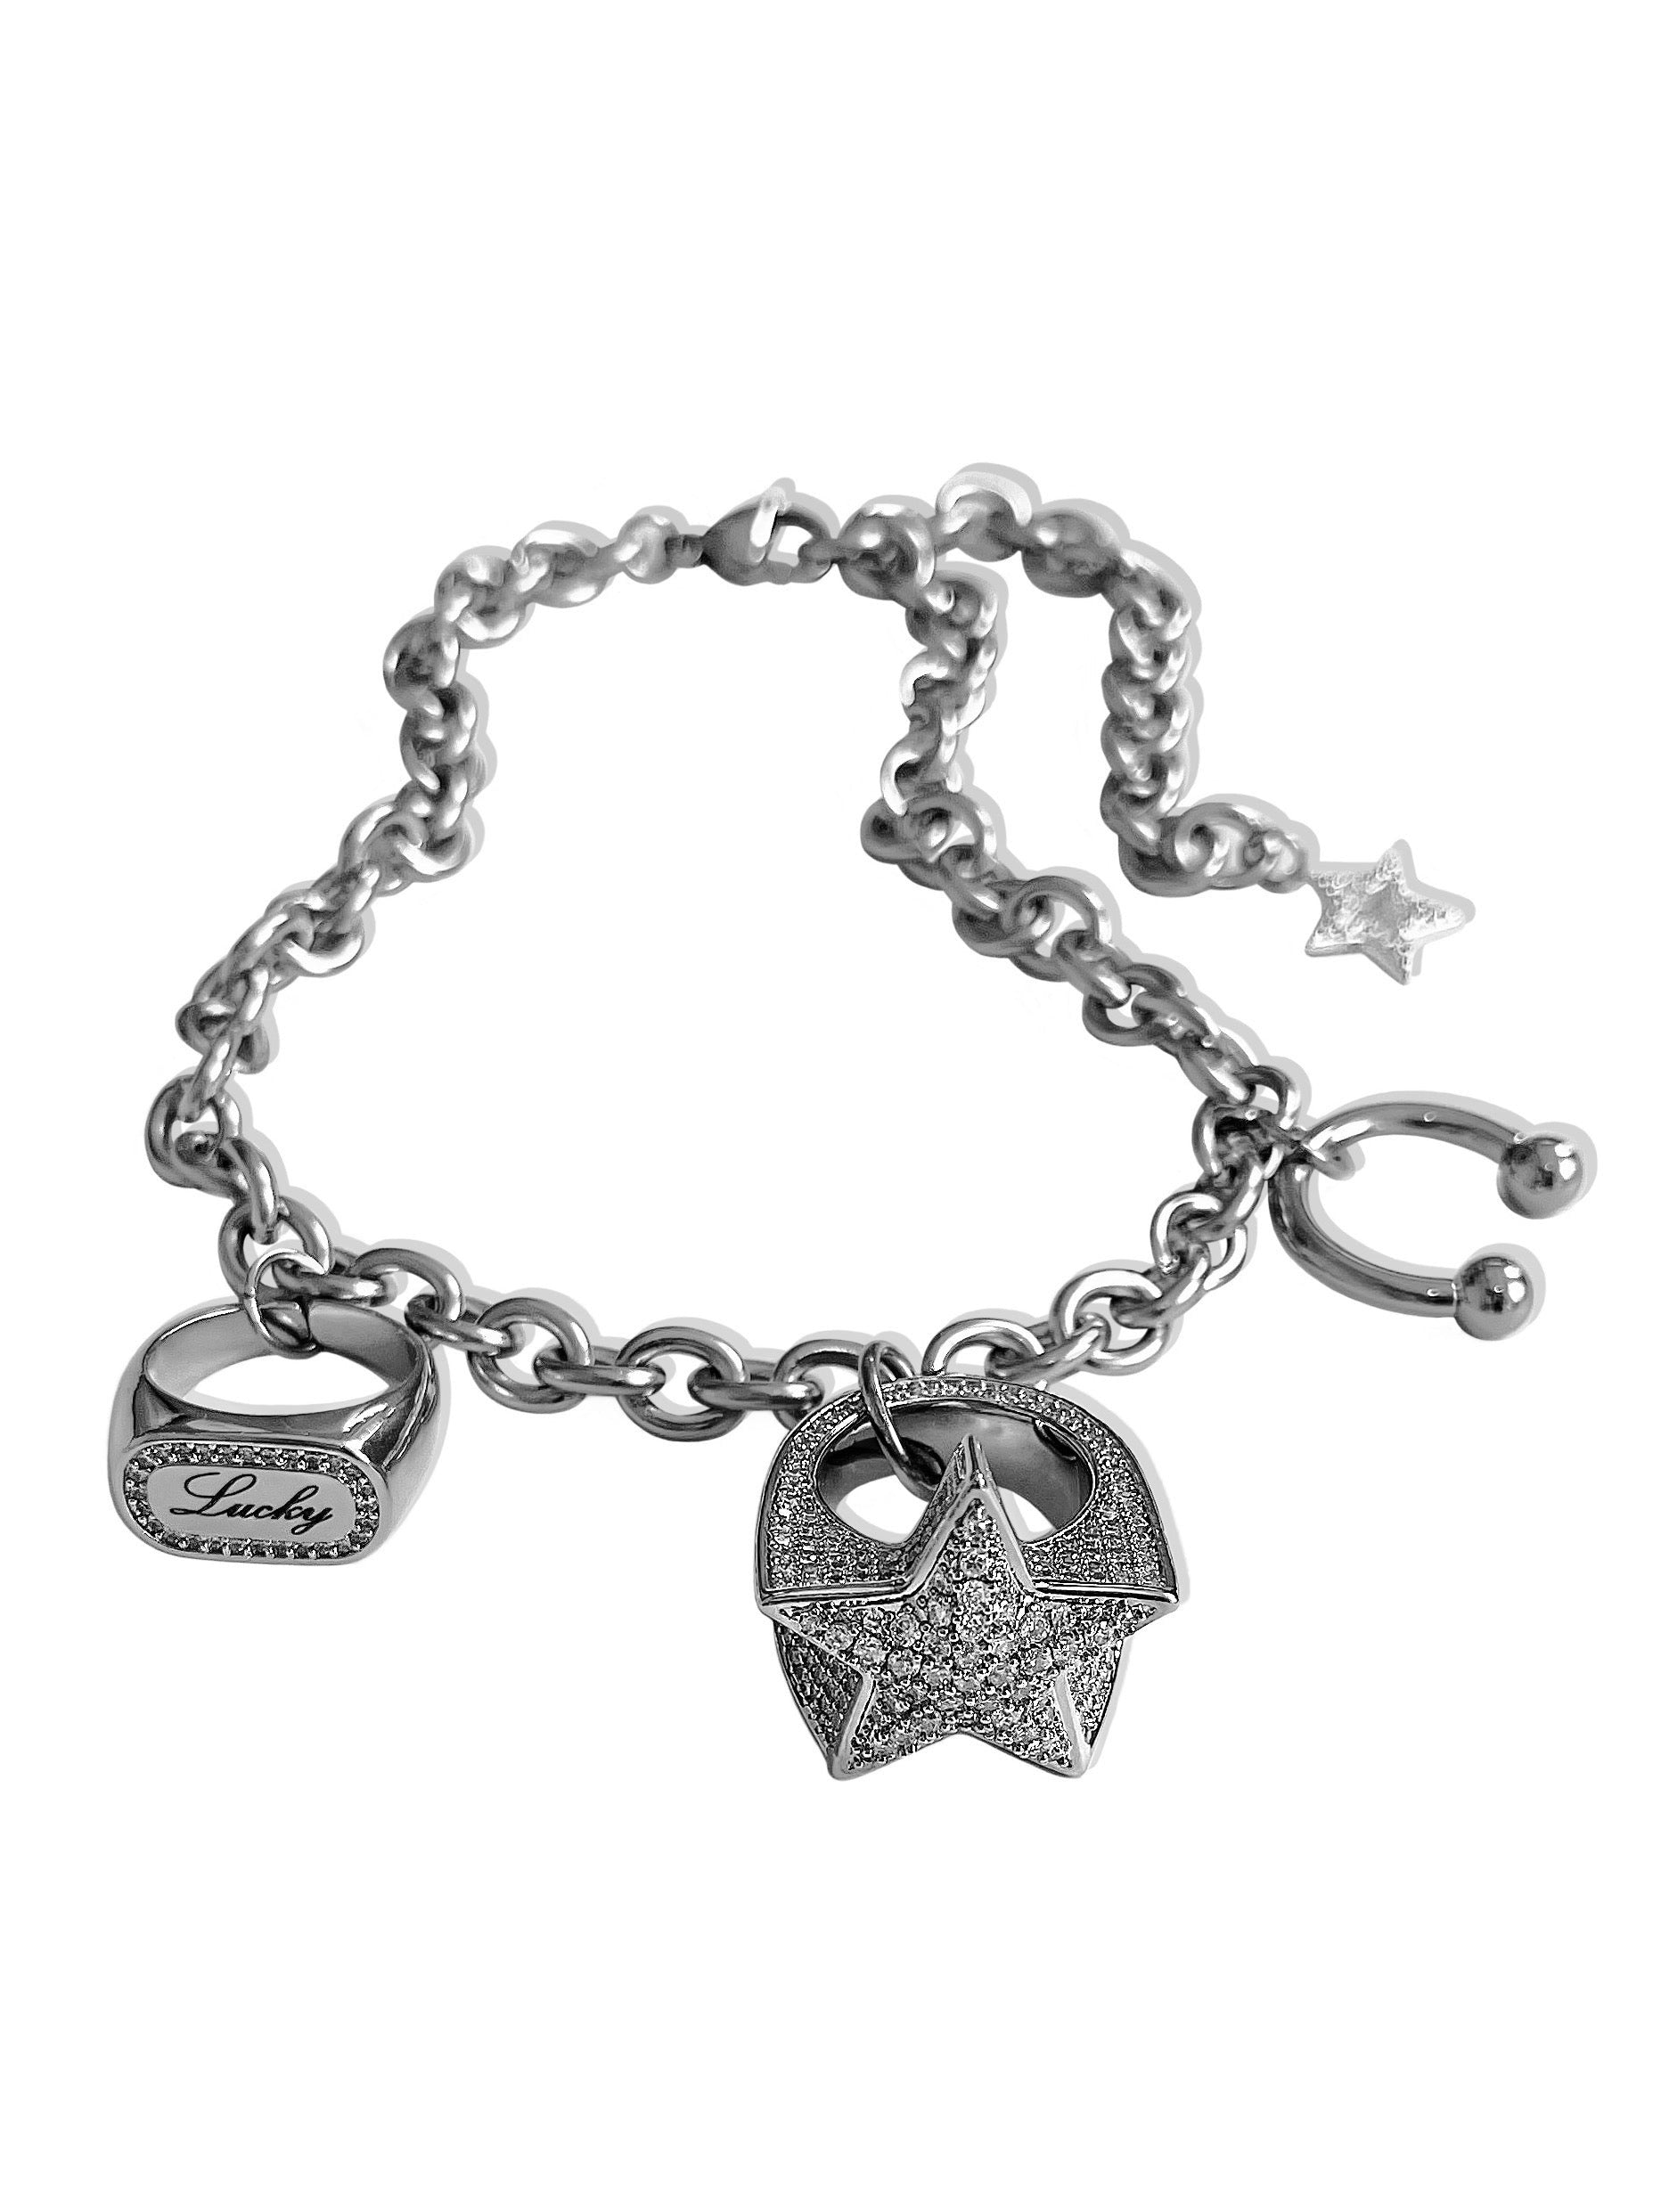 LUCKY STAR STATEMENT RING NECKLACE